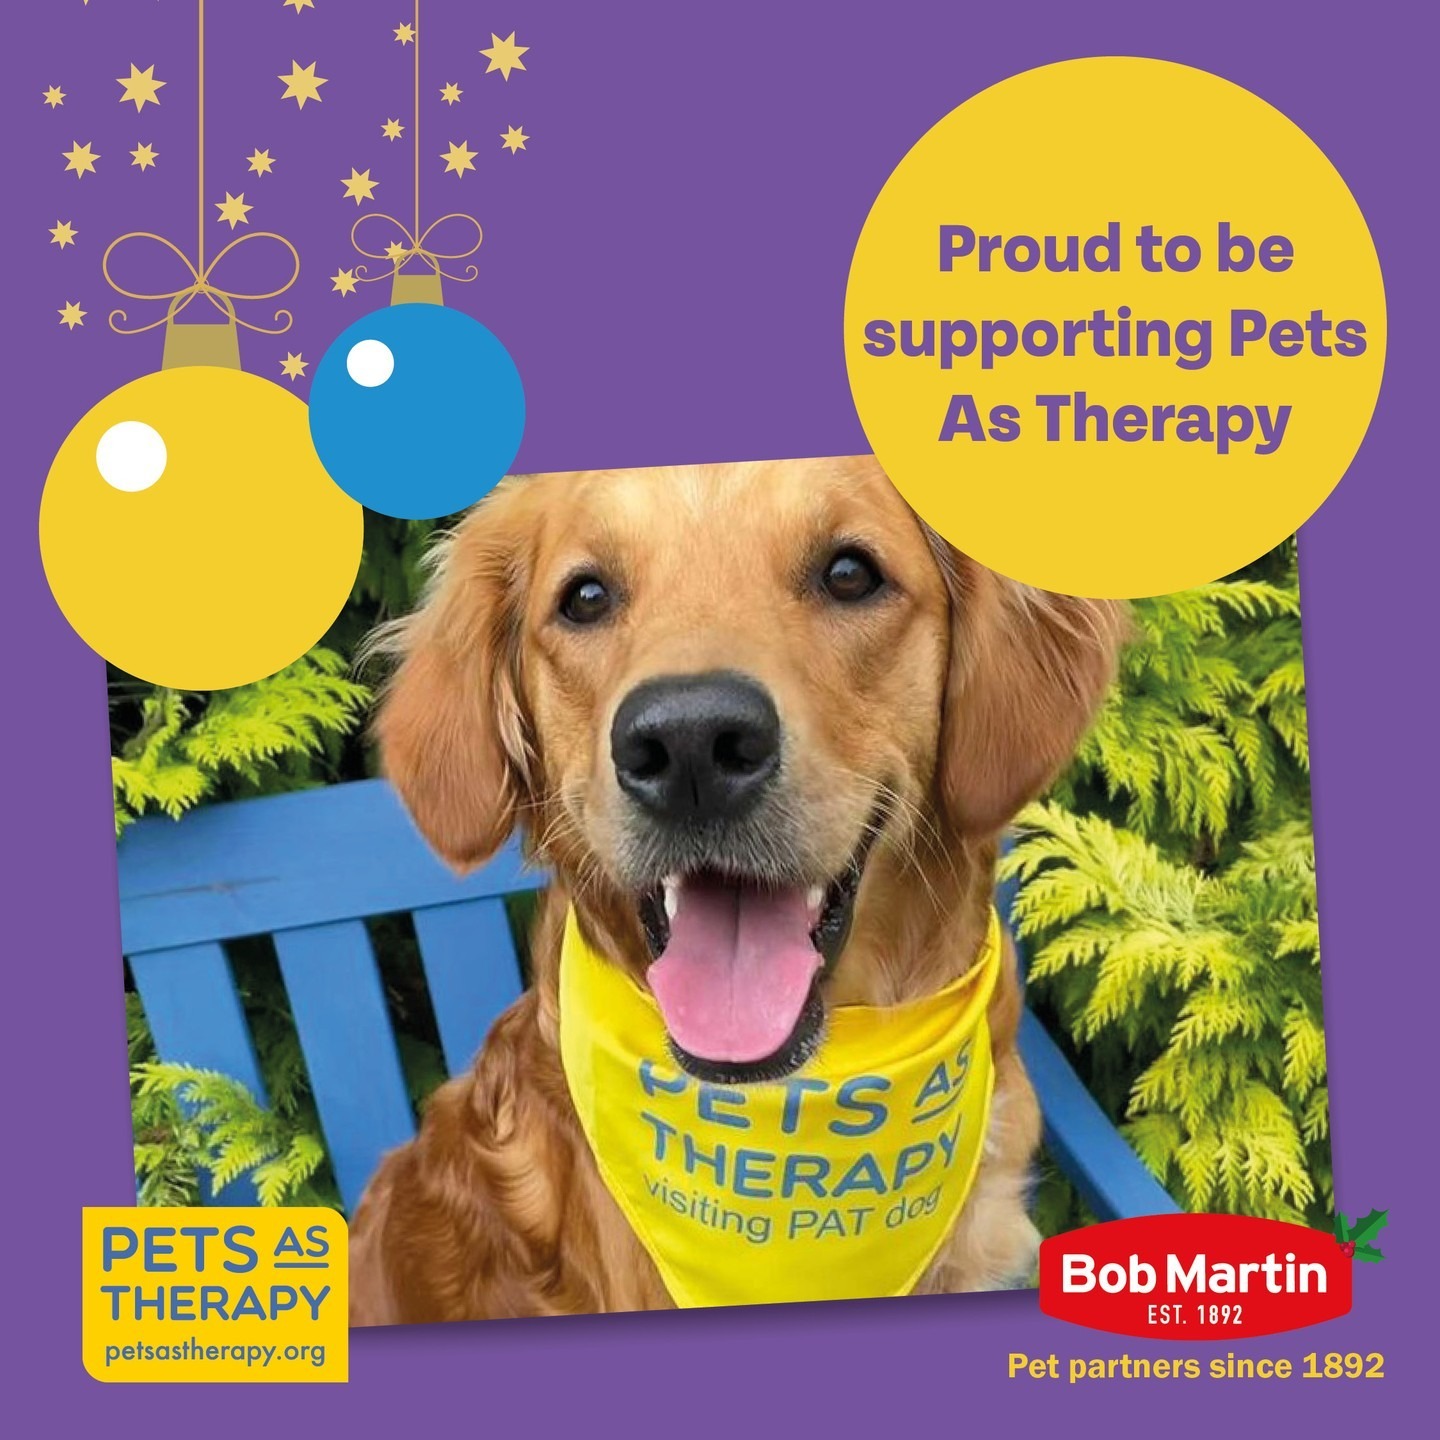 Tis’ the season of giving but the pooches at Pets as Therapy give their love and affection every day of the year 💛 We are so proud to be supporting such an amazing charity to help raise awareness of the mental and physical support pets can provide!

#BobMartin #PetHealthcare #Flea #Worm #Dog #Cat #SpotOn #Pets #PetsOfInstagram #PetCare #PetTips #PetHealth #HealthyPets #ActivePets #charity #therapydog #christmas #festive